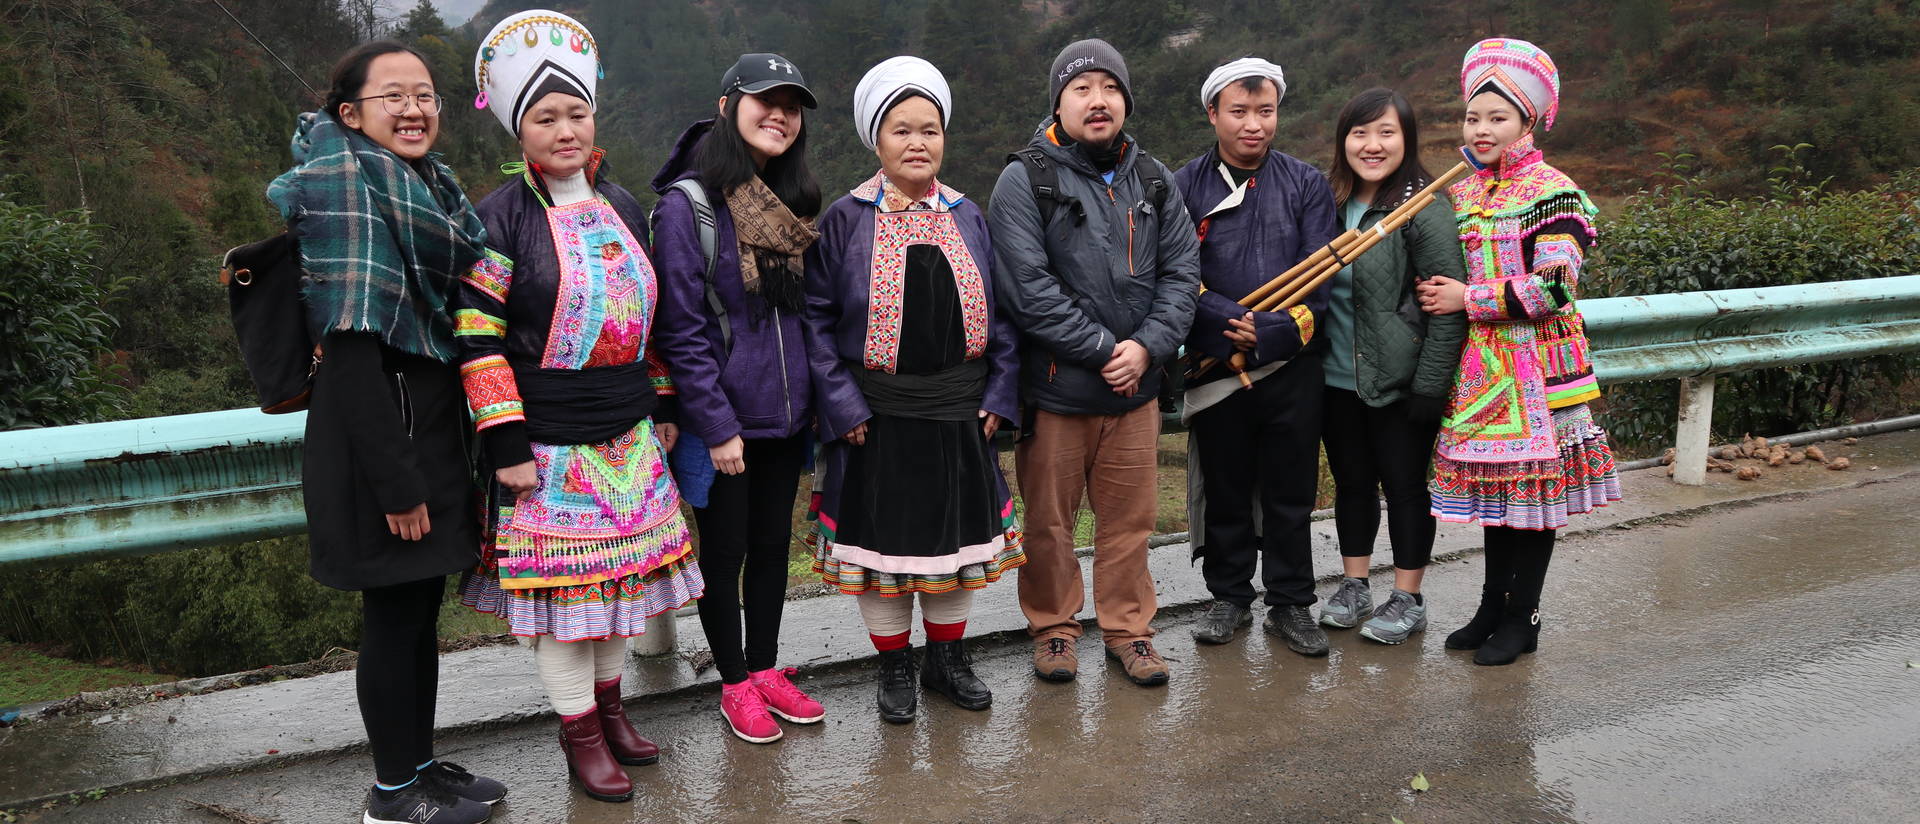 Blugolds spent time exploring small villages in the southern part of China during Winterim, immersing themselves in Hmong and other ethnic cultures.